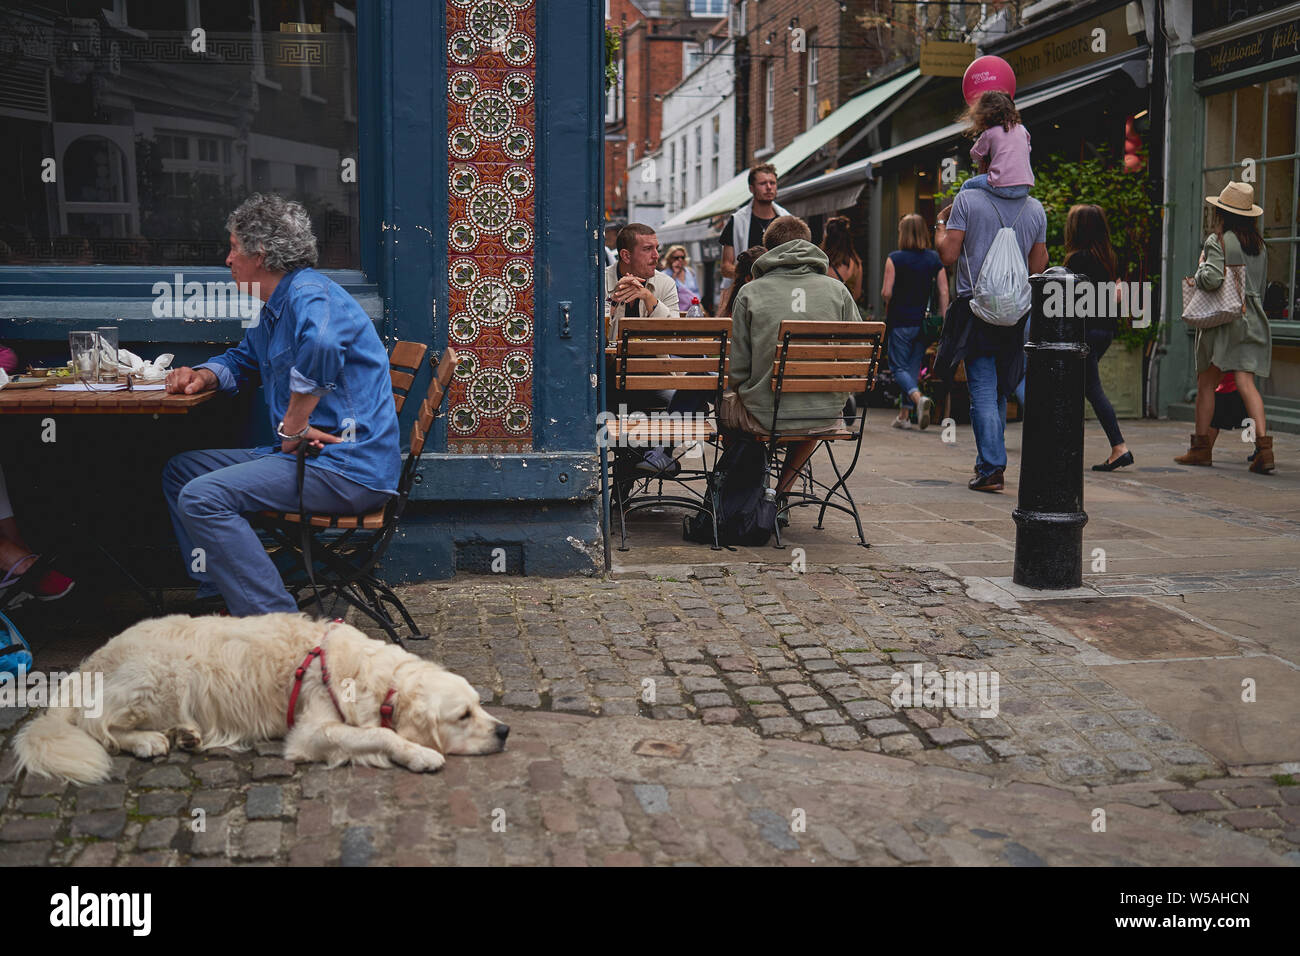 London, UK - July, 2019. A white dog on a leash on a pavement outside a pub in Hampstead, an elegant residential area in North London. Stock Photo